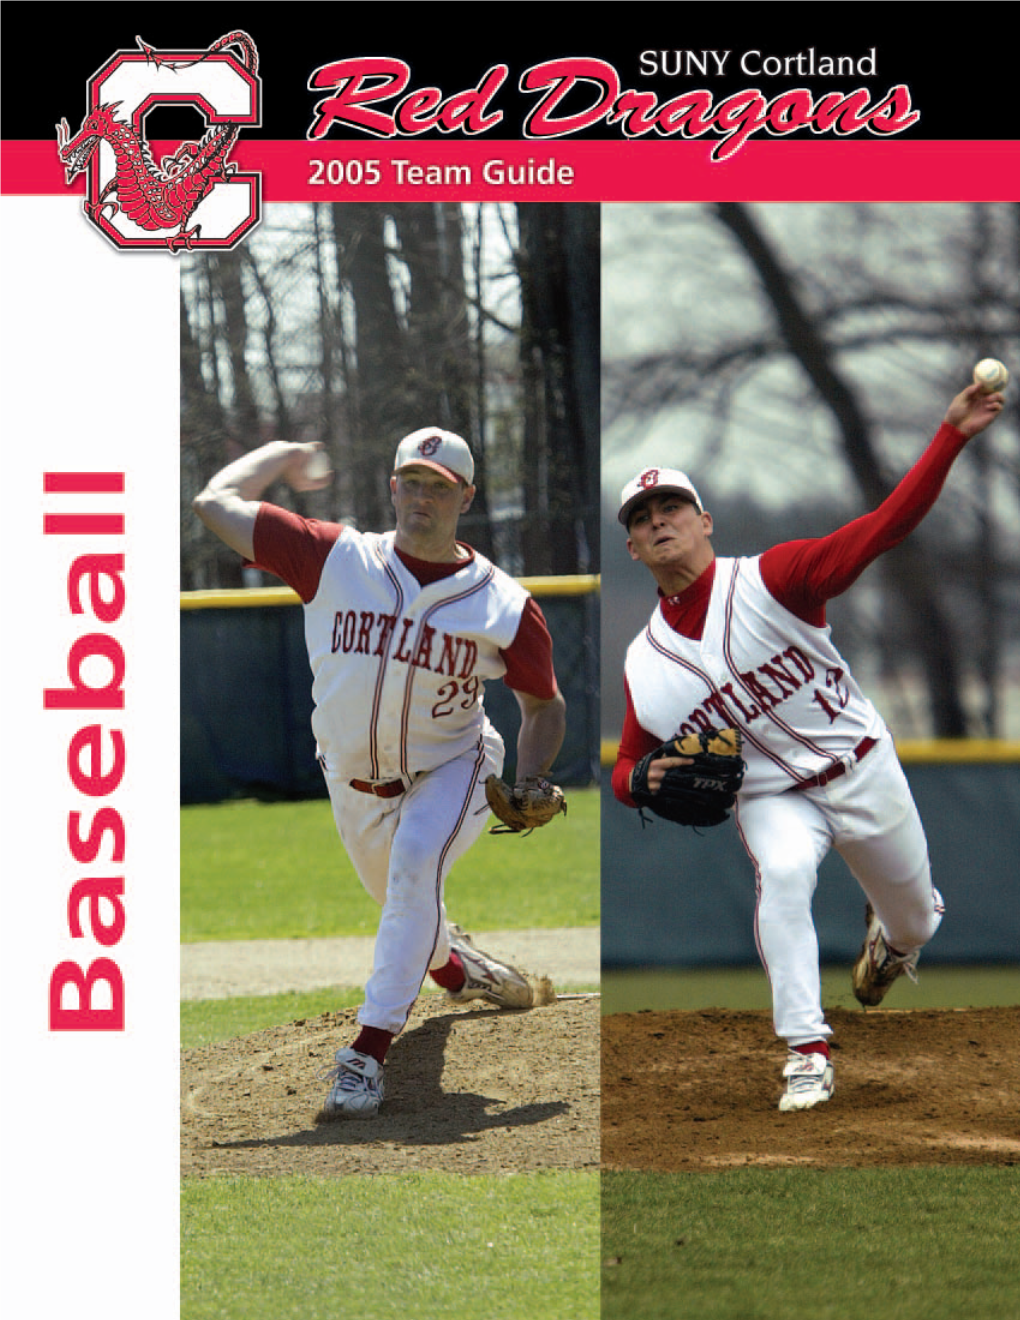 Cortland Players in Professional Baseball (Since 1994) Name (Yrs at Cortland), Pos